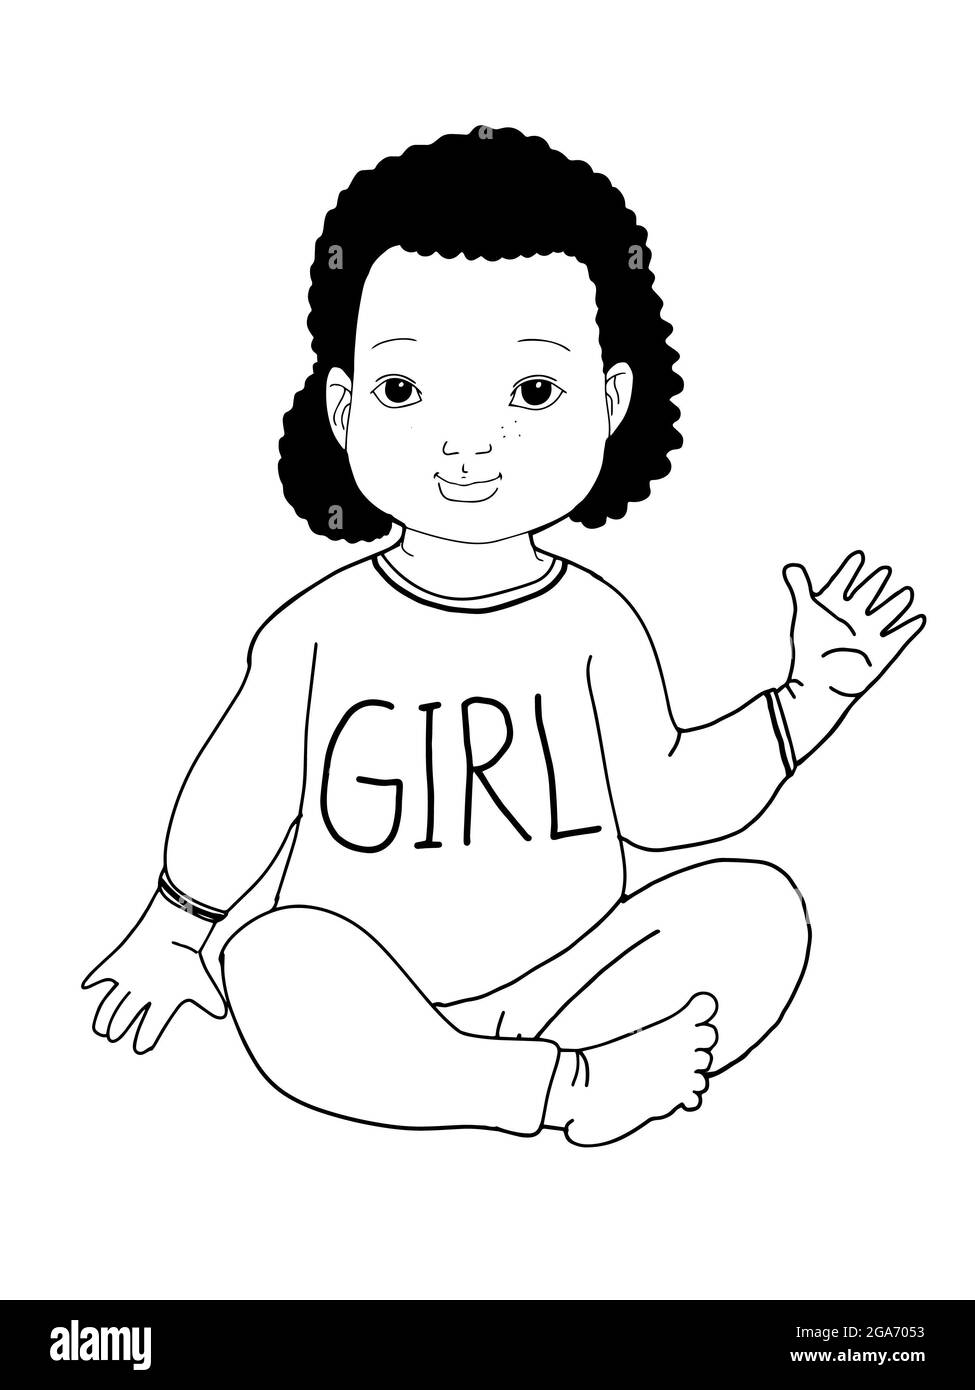 Cute ,cartoon ,black curly girl baby  sitting ,hi five,illustration  girl text clothes black white colors Stock Photo